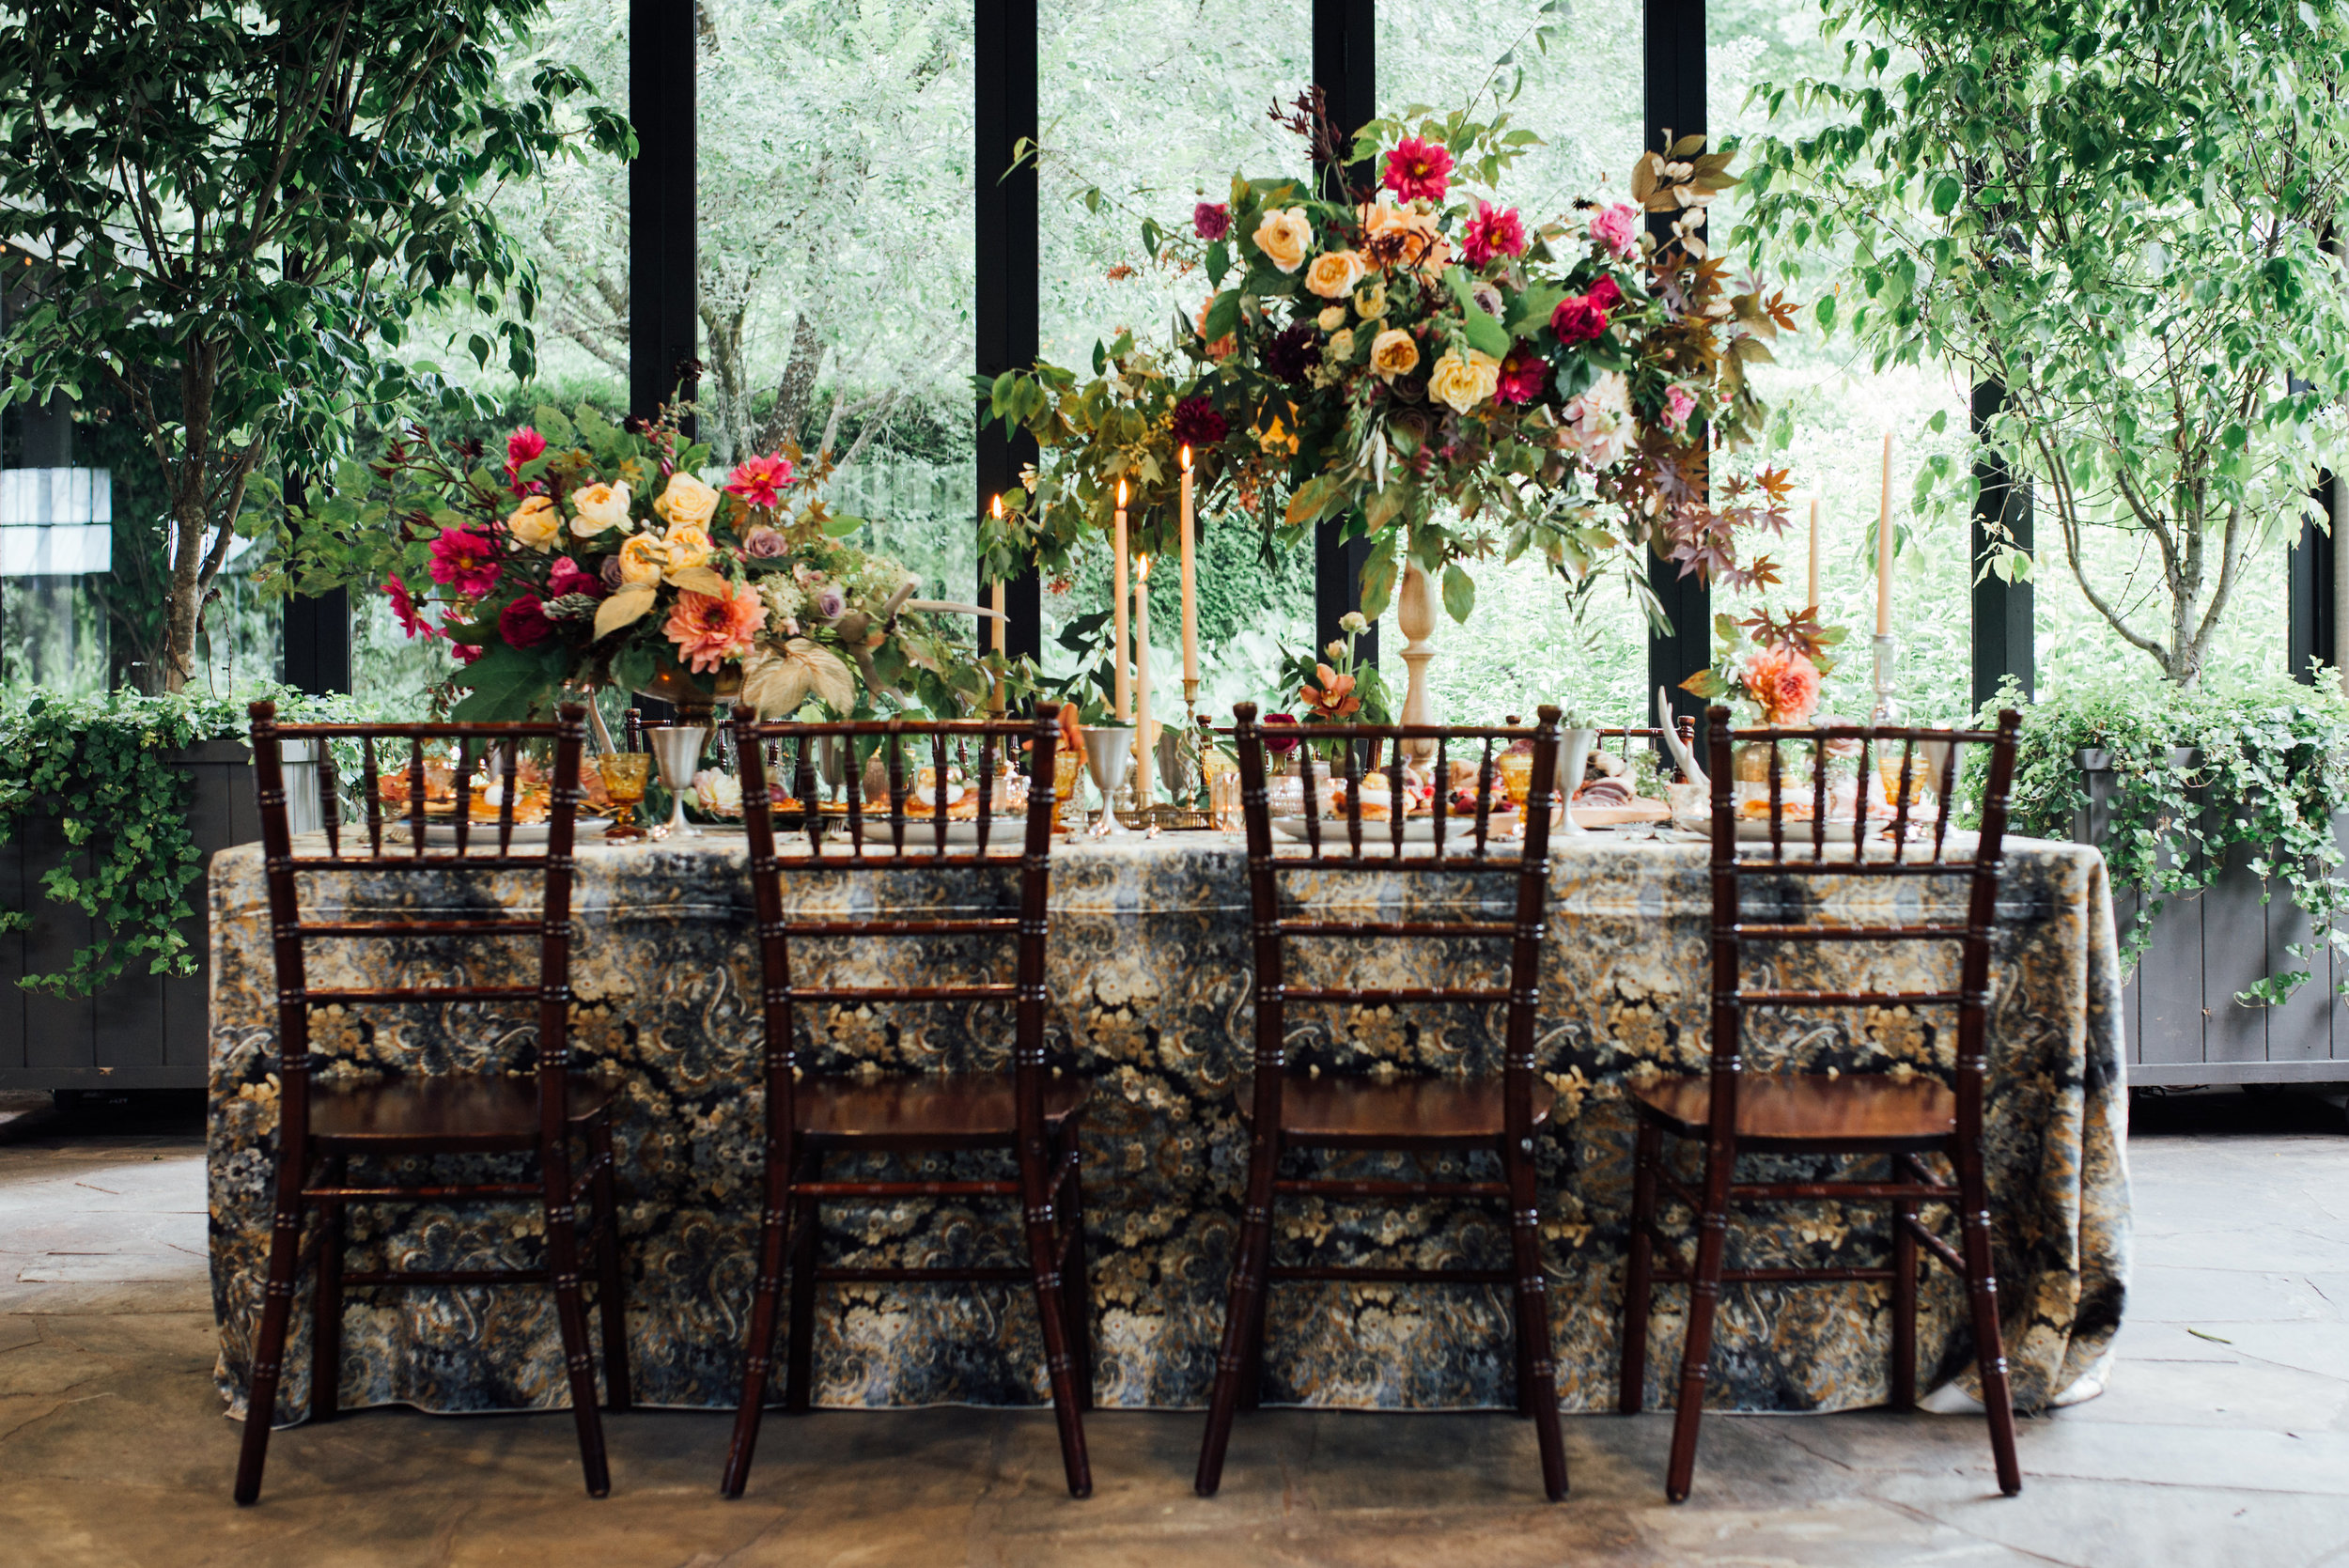  Game of Thrones Editorial Shoot by Whiskey &amp; White Events. At the Old Edwards Inn in Highlands, NC.&nbsp;  Photo by Cameron Reynolds Photography  Design &amp; Styling by Whiskey &amp; White Events  Menus by One and Only Paper  Florals by Floress